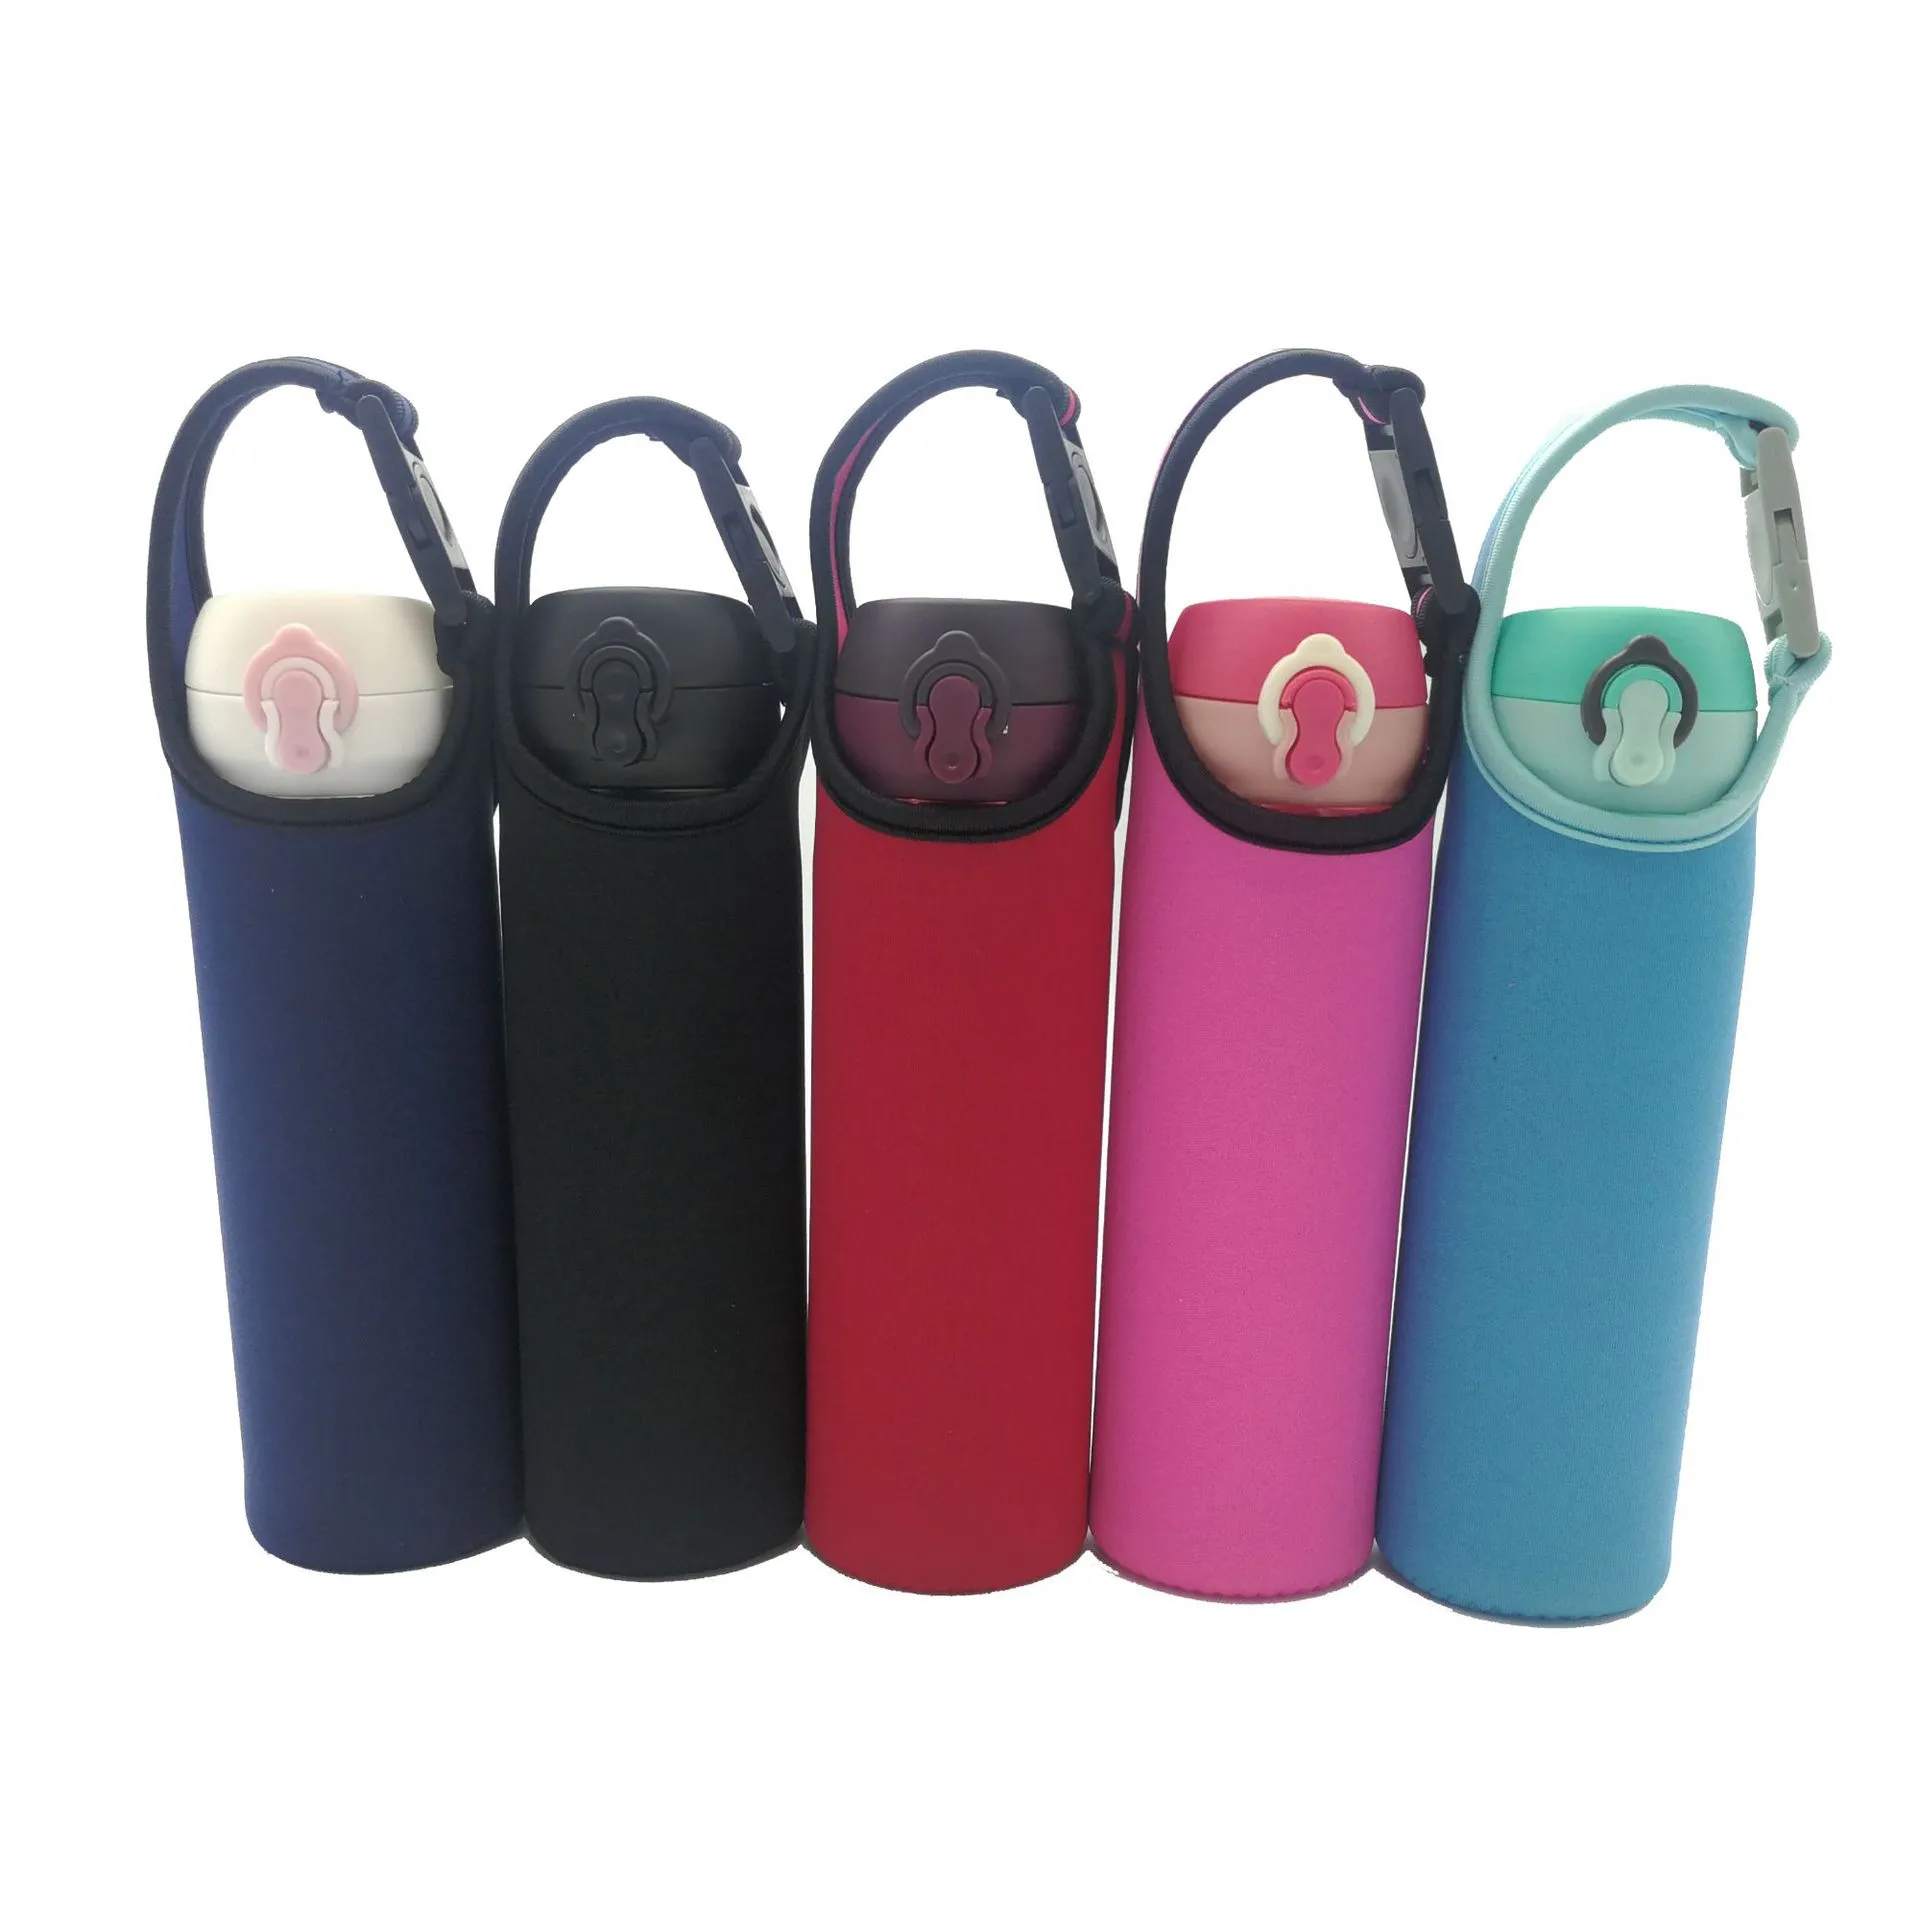 Glass Water Bottle Sleeve Portable Bottle Cooler Cover Holder Strap for Outdoor Neoprene Insulated Collapsible Drink Bottle Covers Carrier